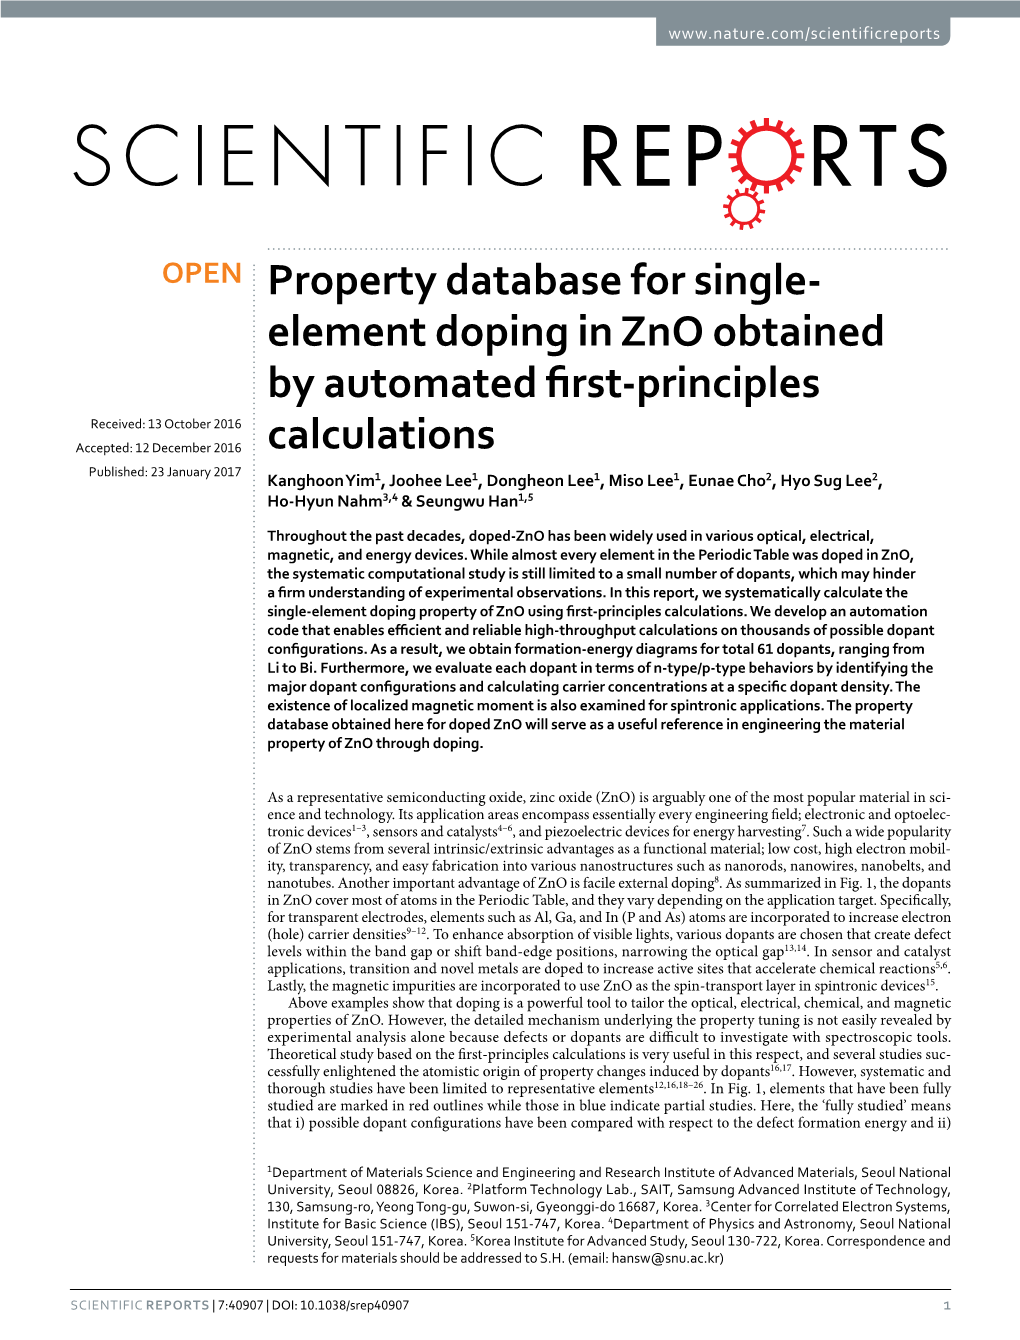 Element Doping in Zno Obtained by Automated First-Principles Calculations